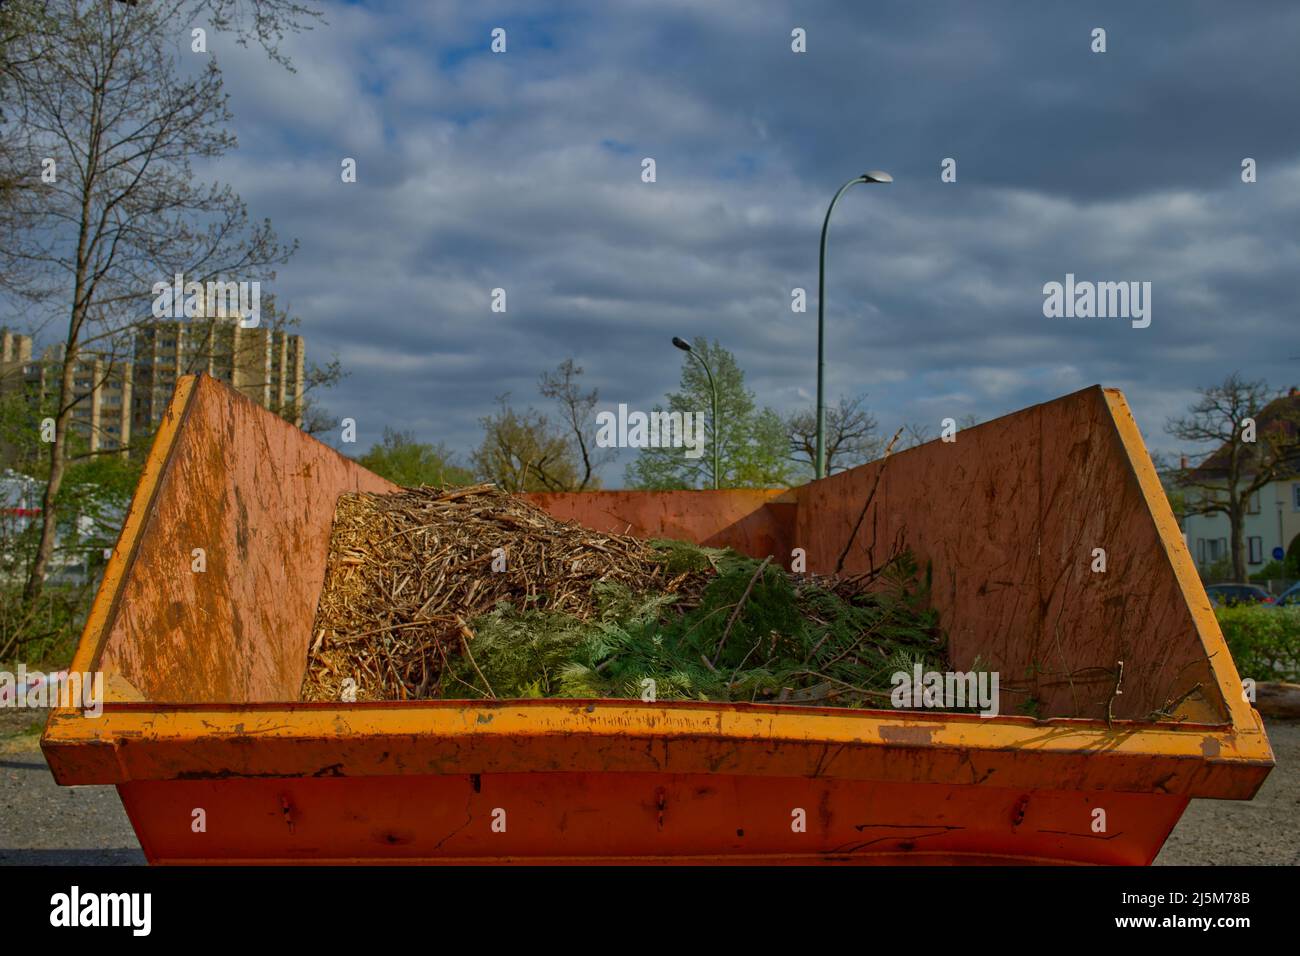 big orange-colored steel waste container with green waste in contrast to a dark clouded sky in grey and blue Stock Photo